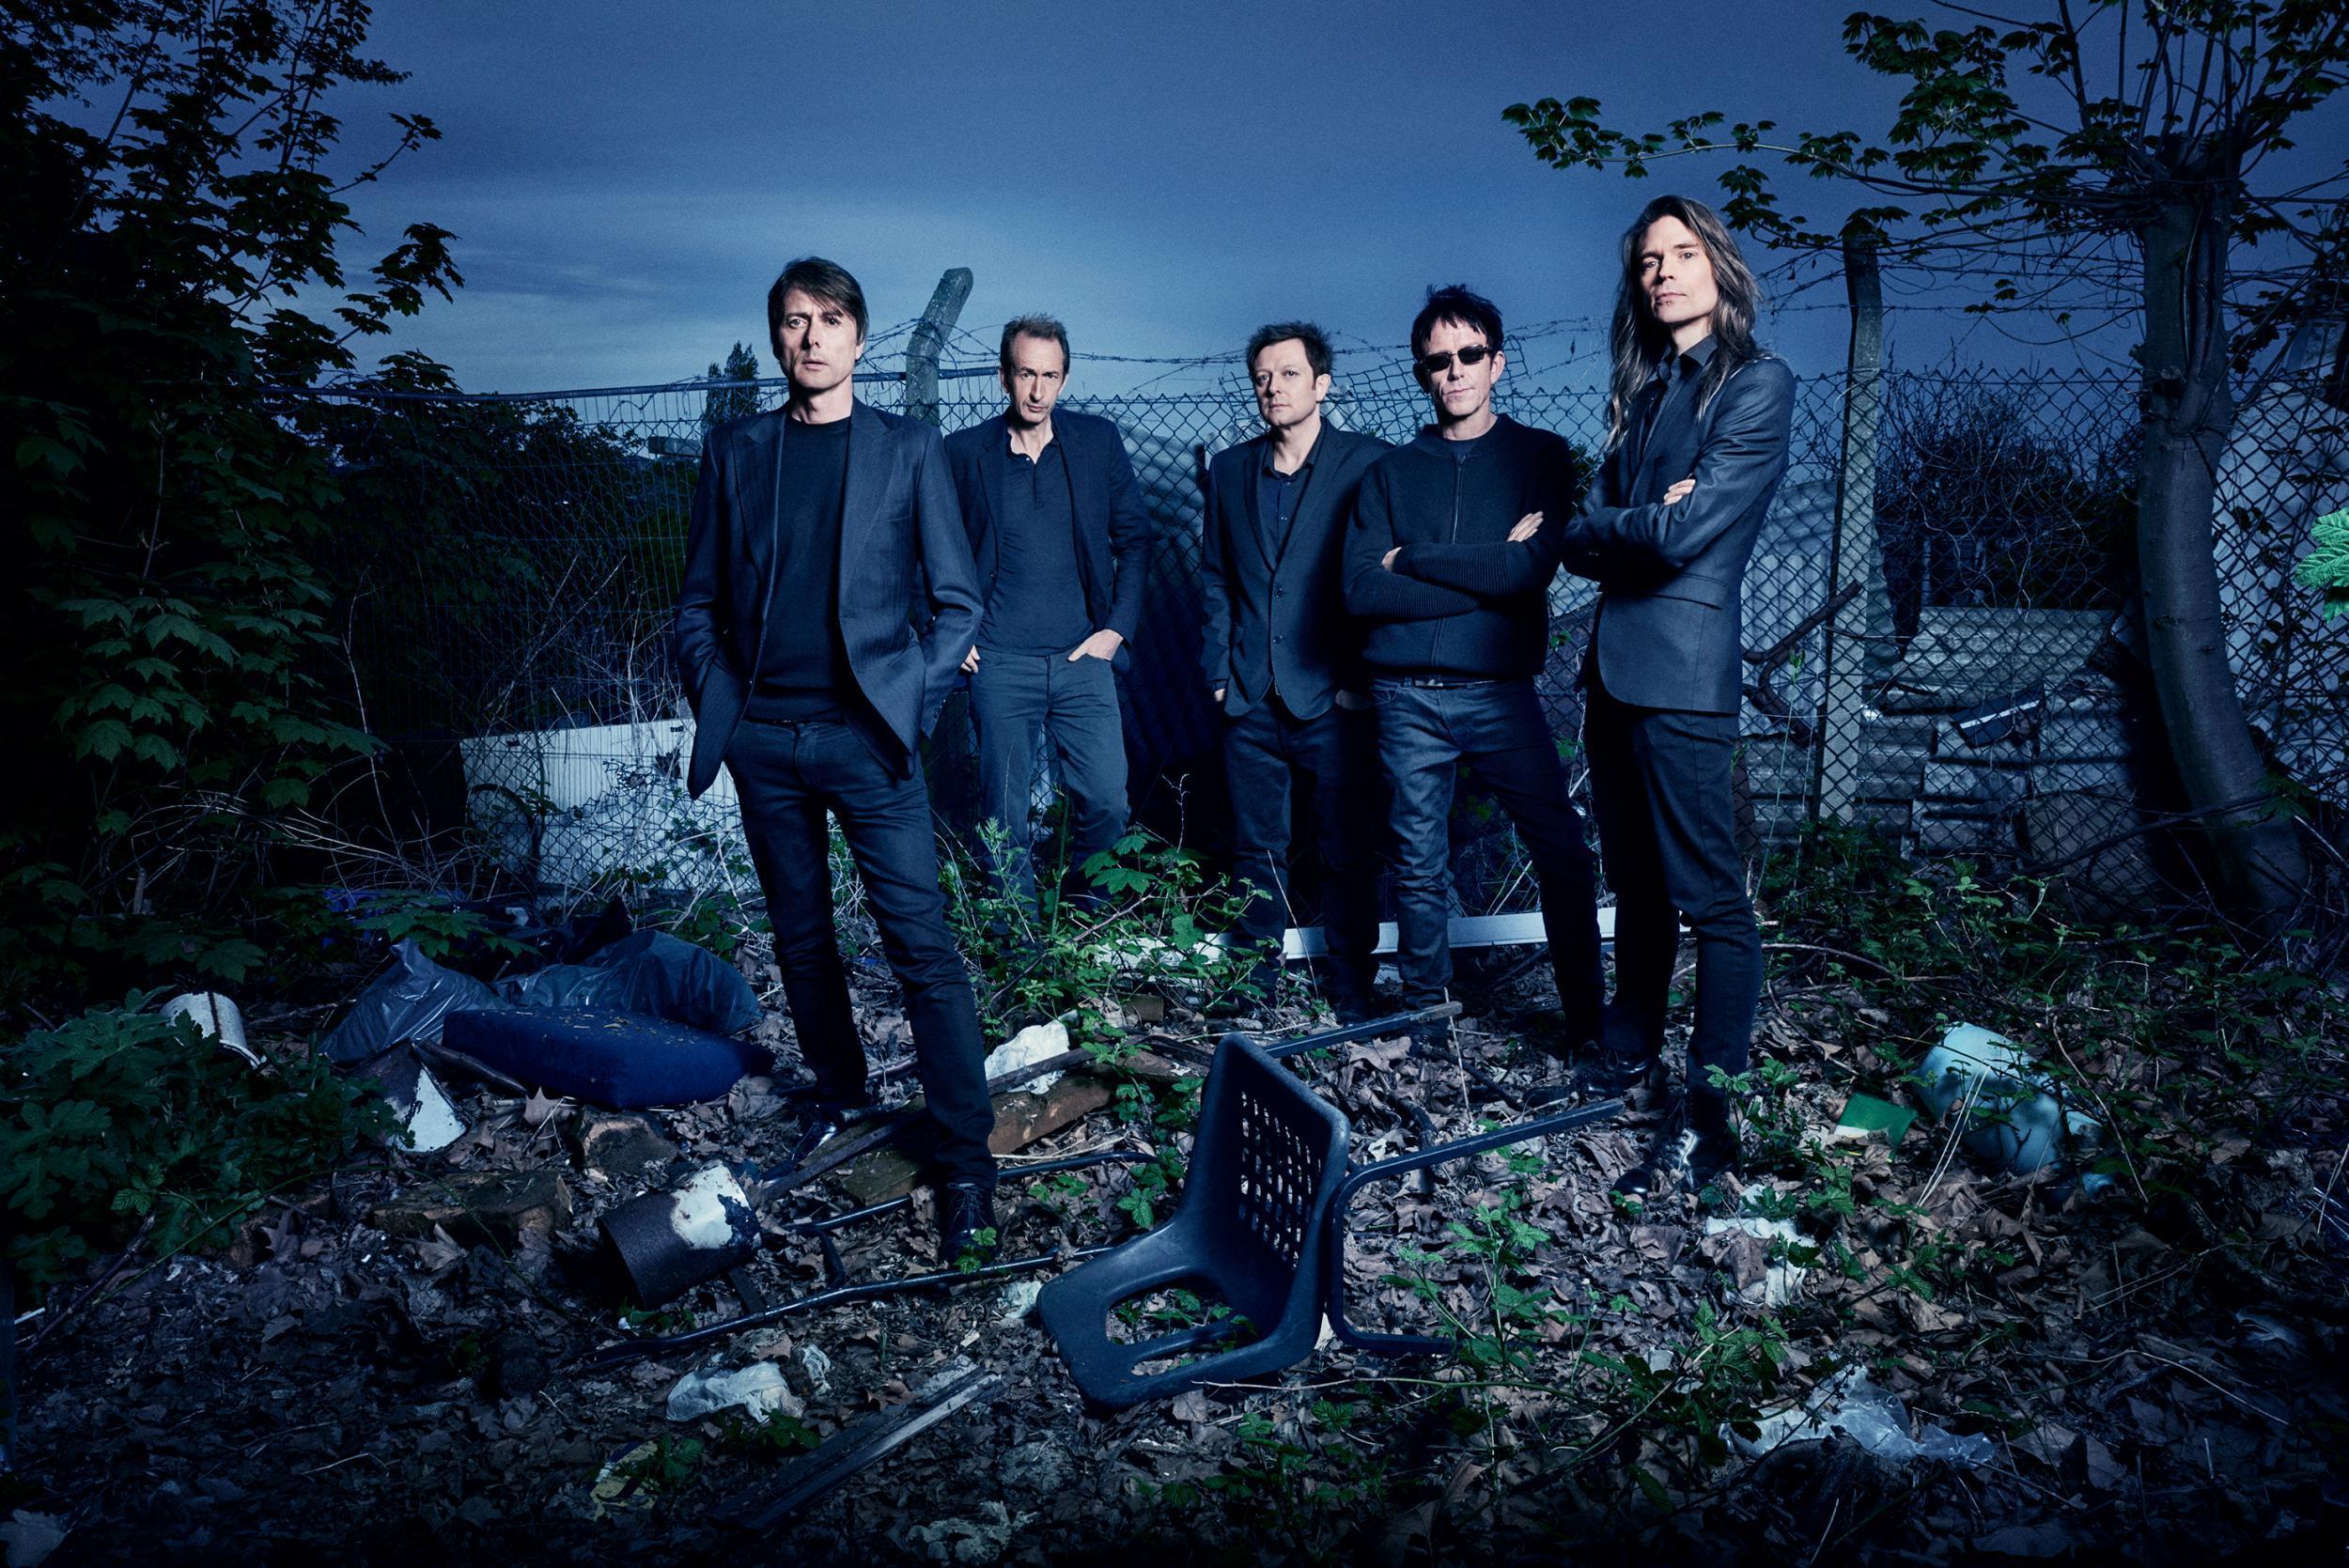 'The story of every band is the same' – Suede: Brett Anderson, Mat Osman, Richard Oakes, Simon Gilbert and Neil Codling